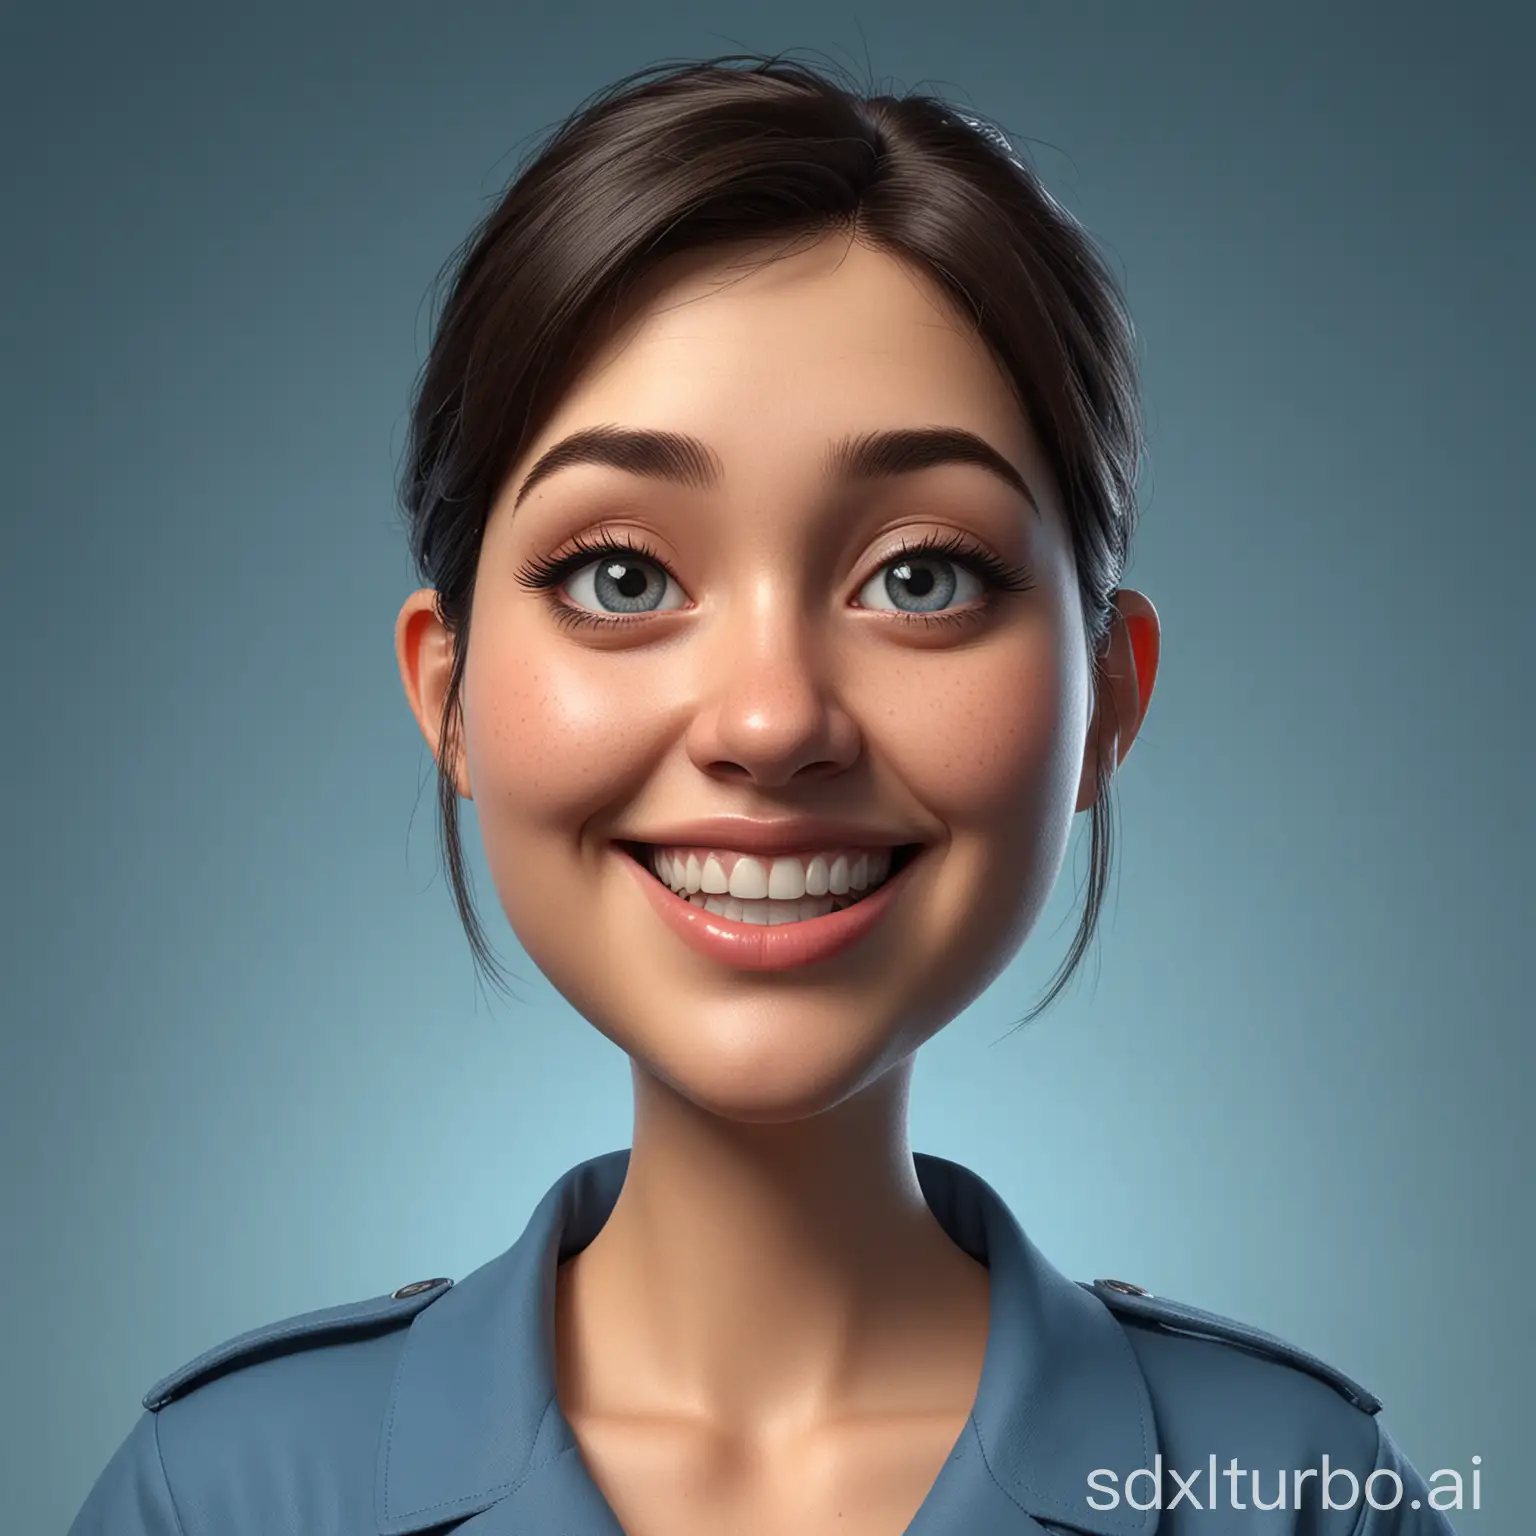 Cheerful-Young-Woman-in-Blue-Uniform-with-Big-Smile-Realistic-Cartoon-Style-3D-Caricature